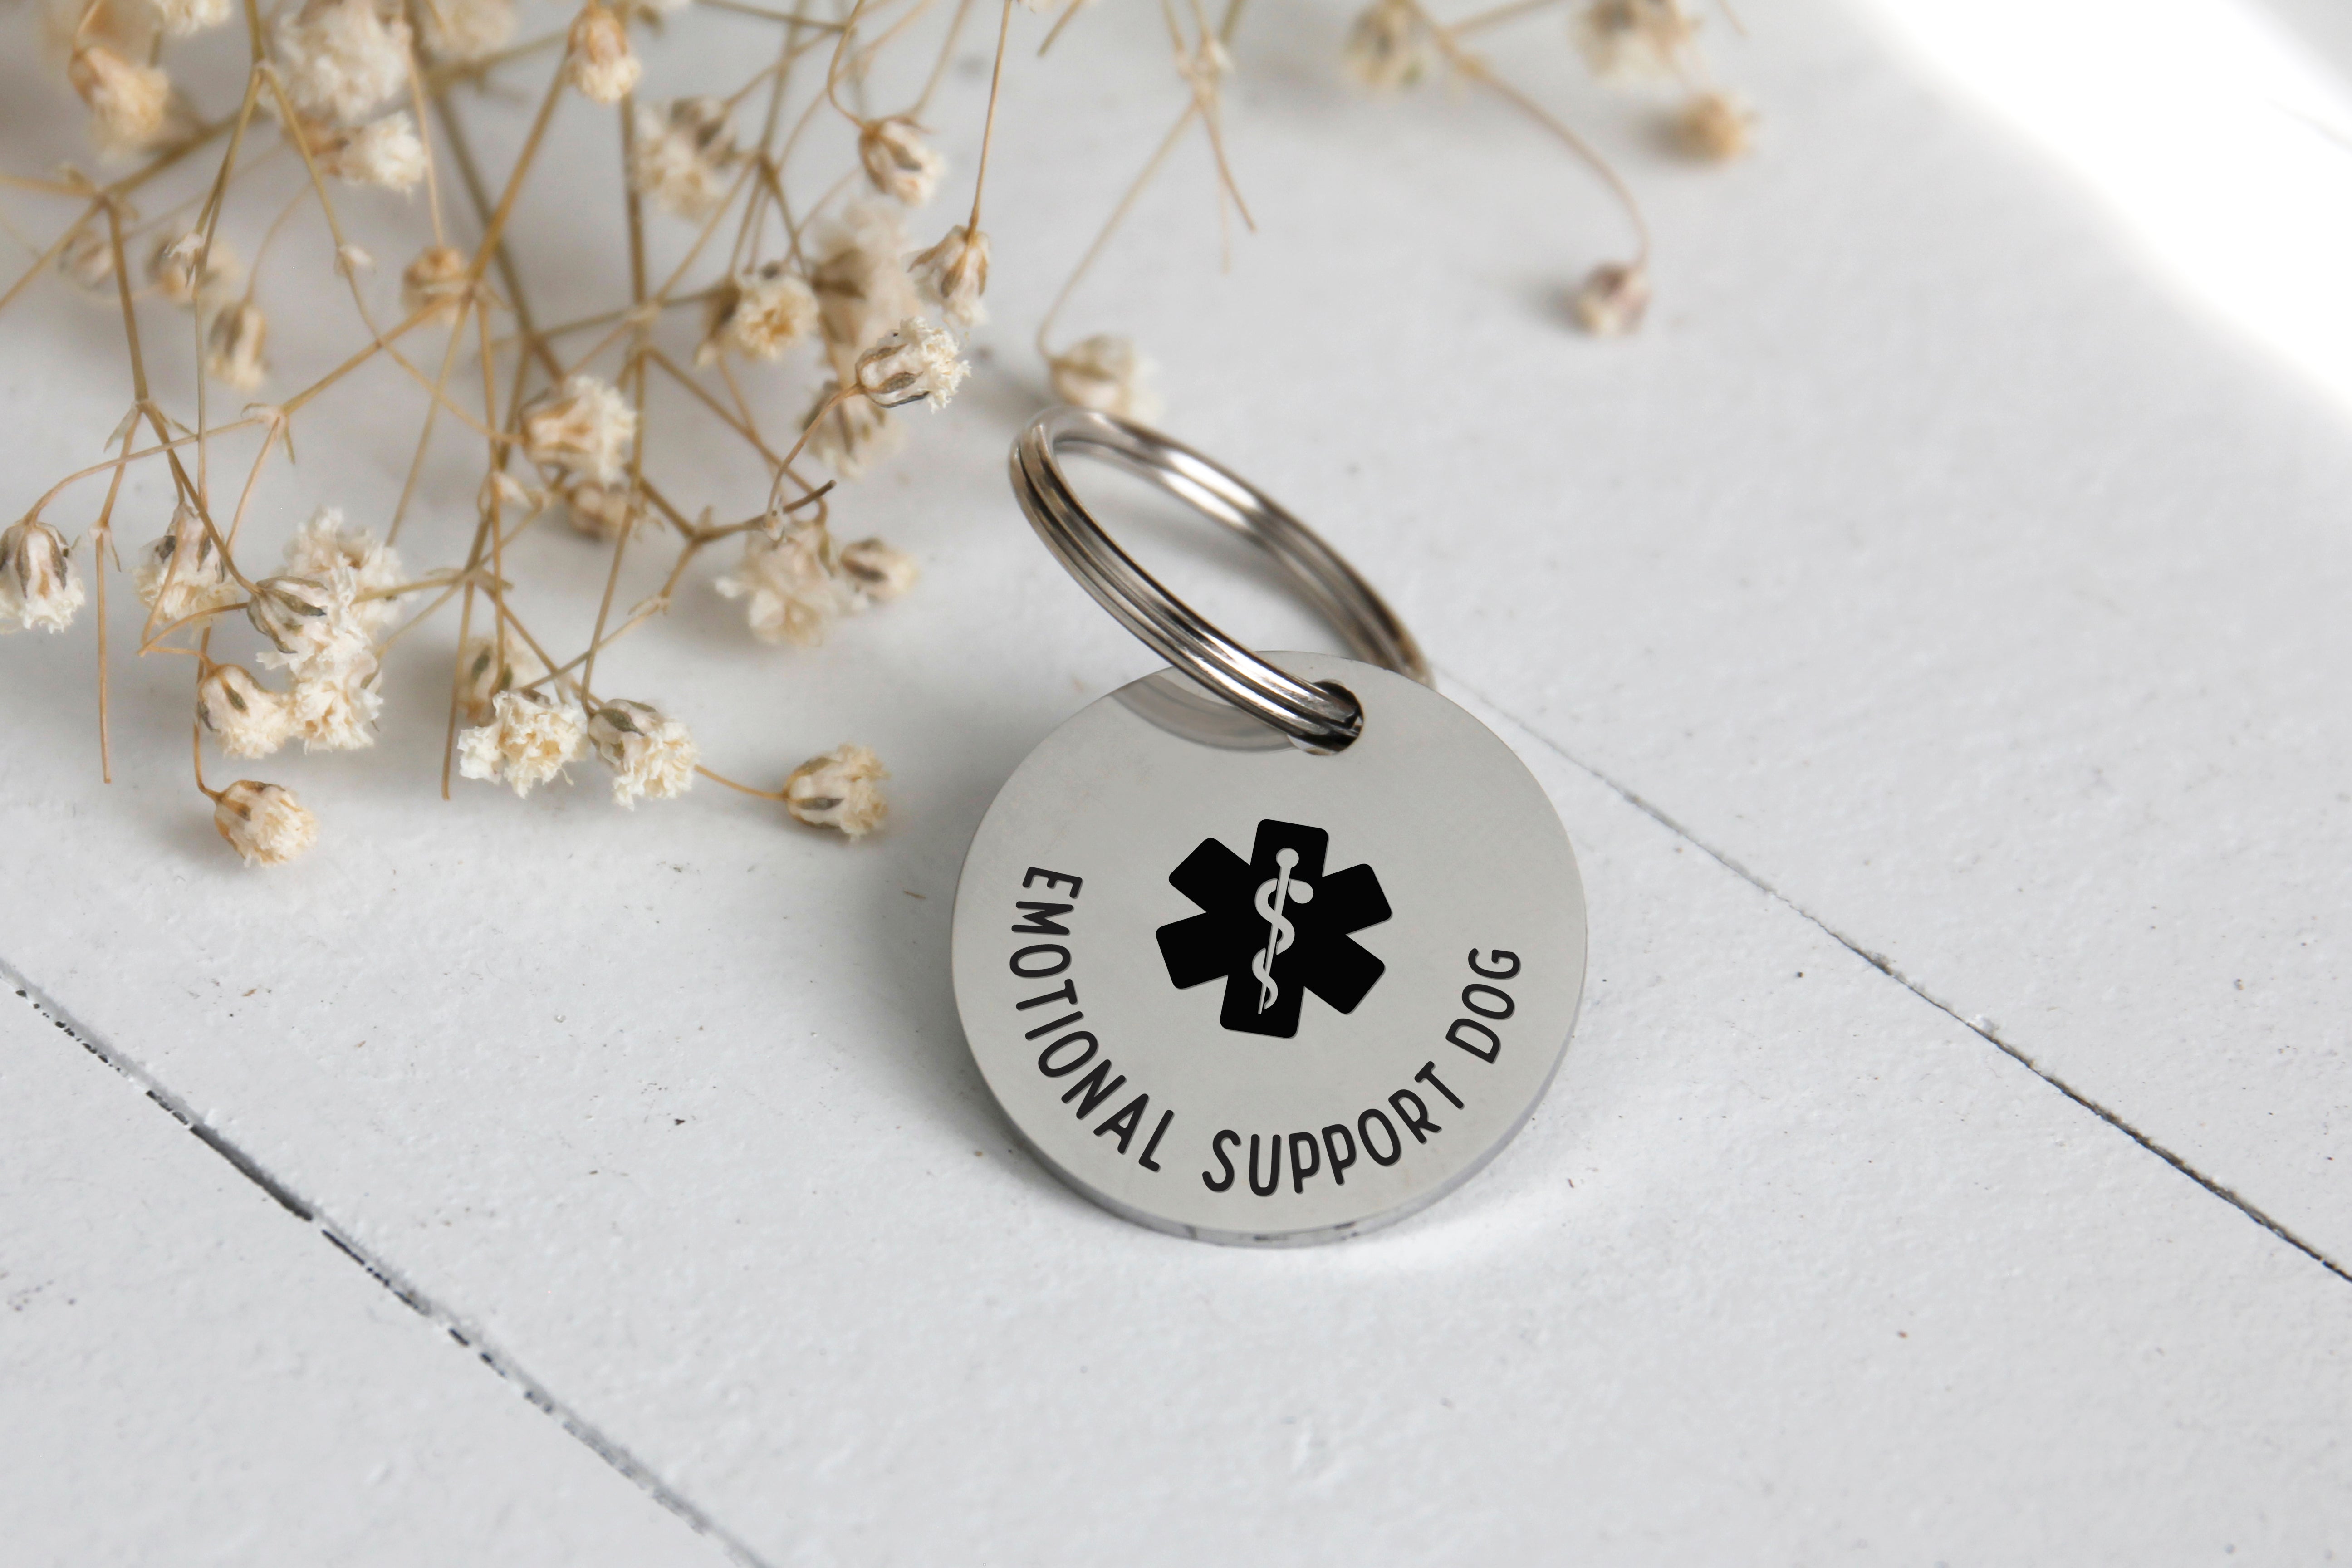 Emotional Support Dog Stainless Steel Pet ID Tag